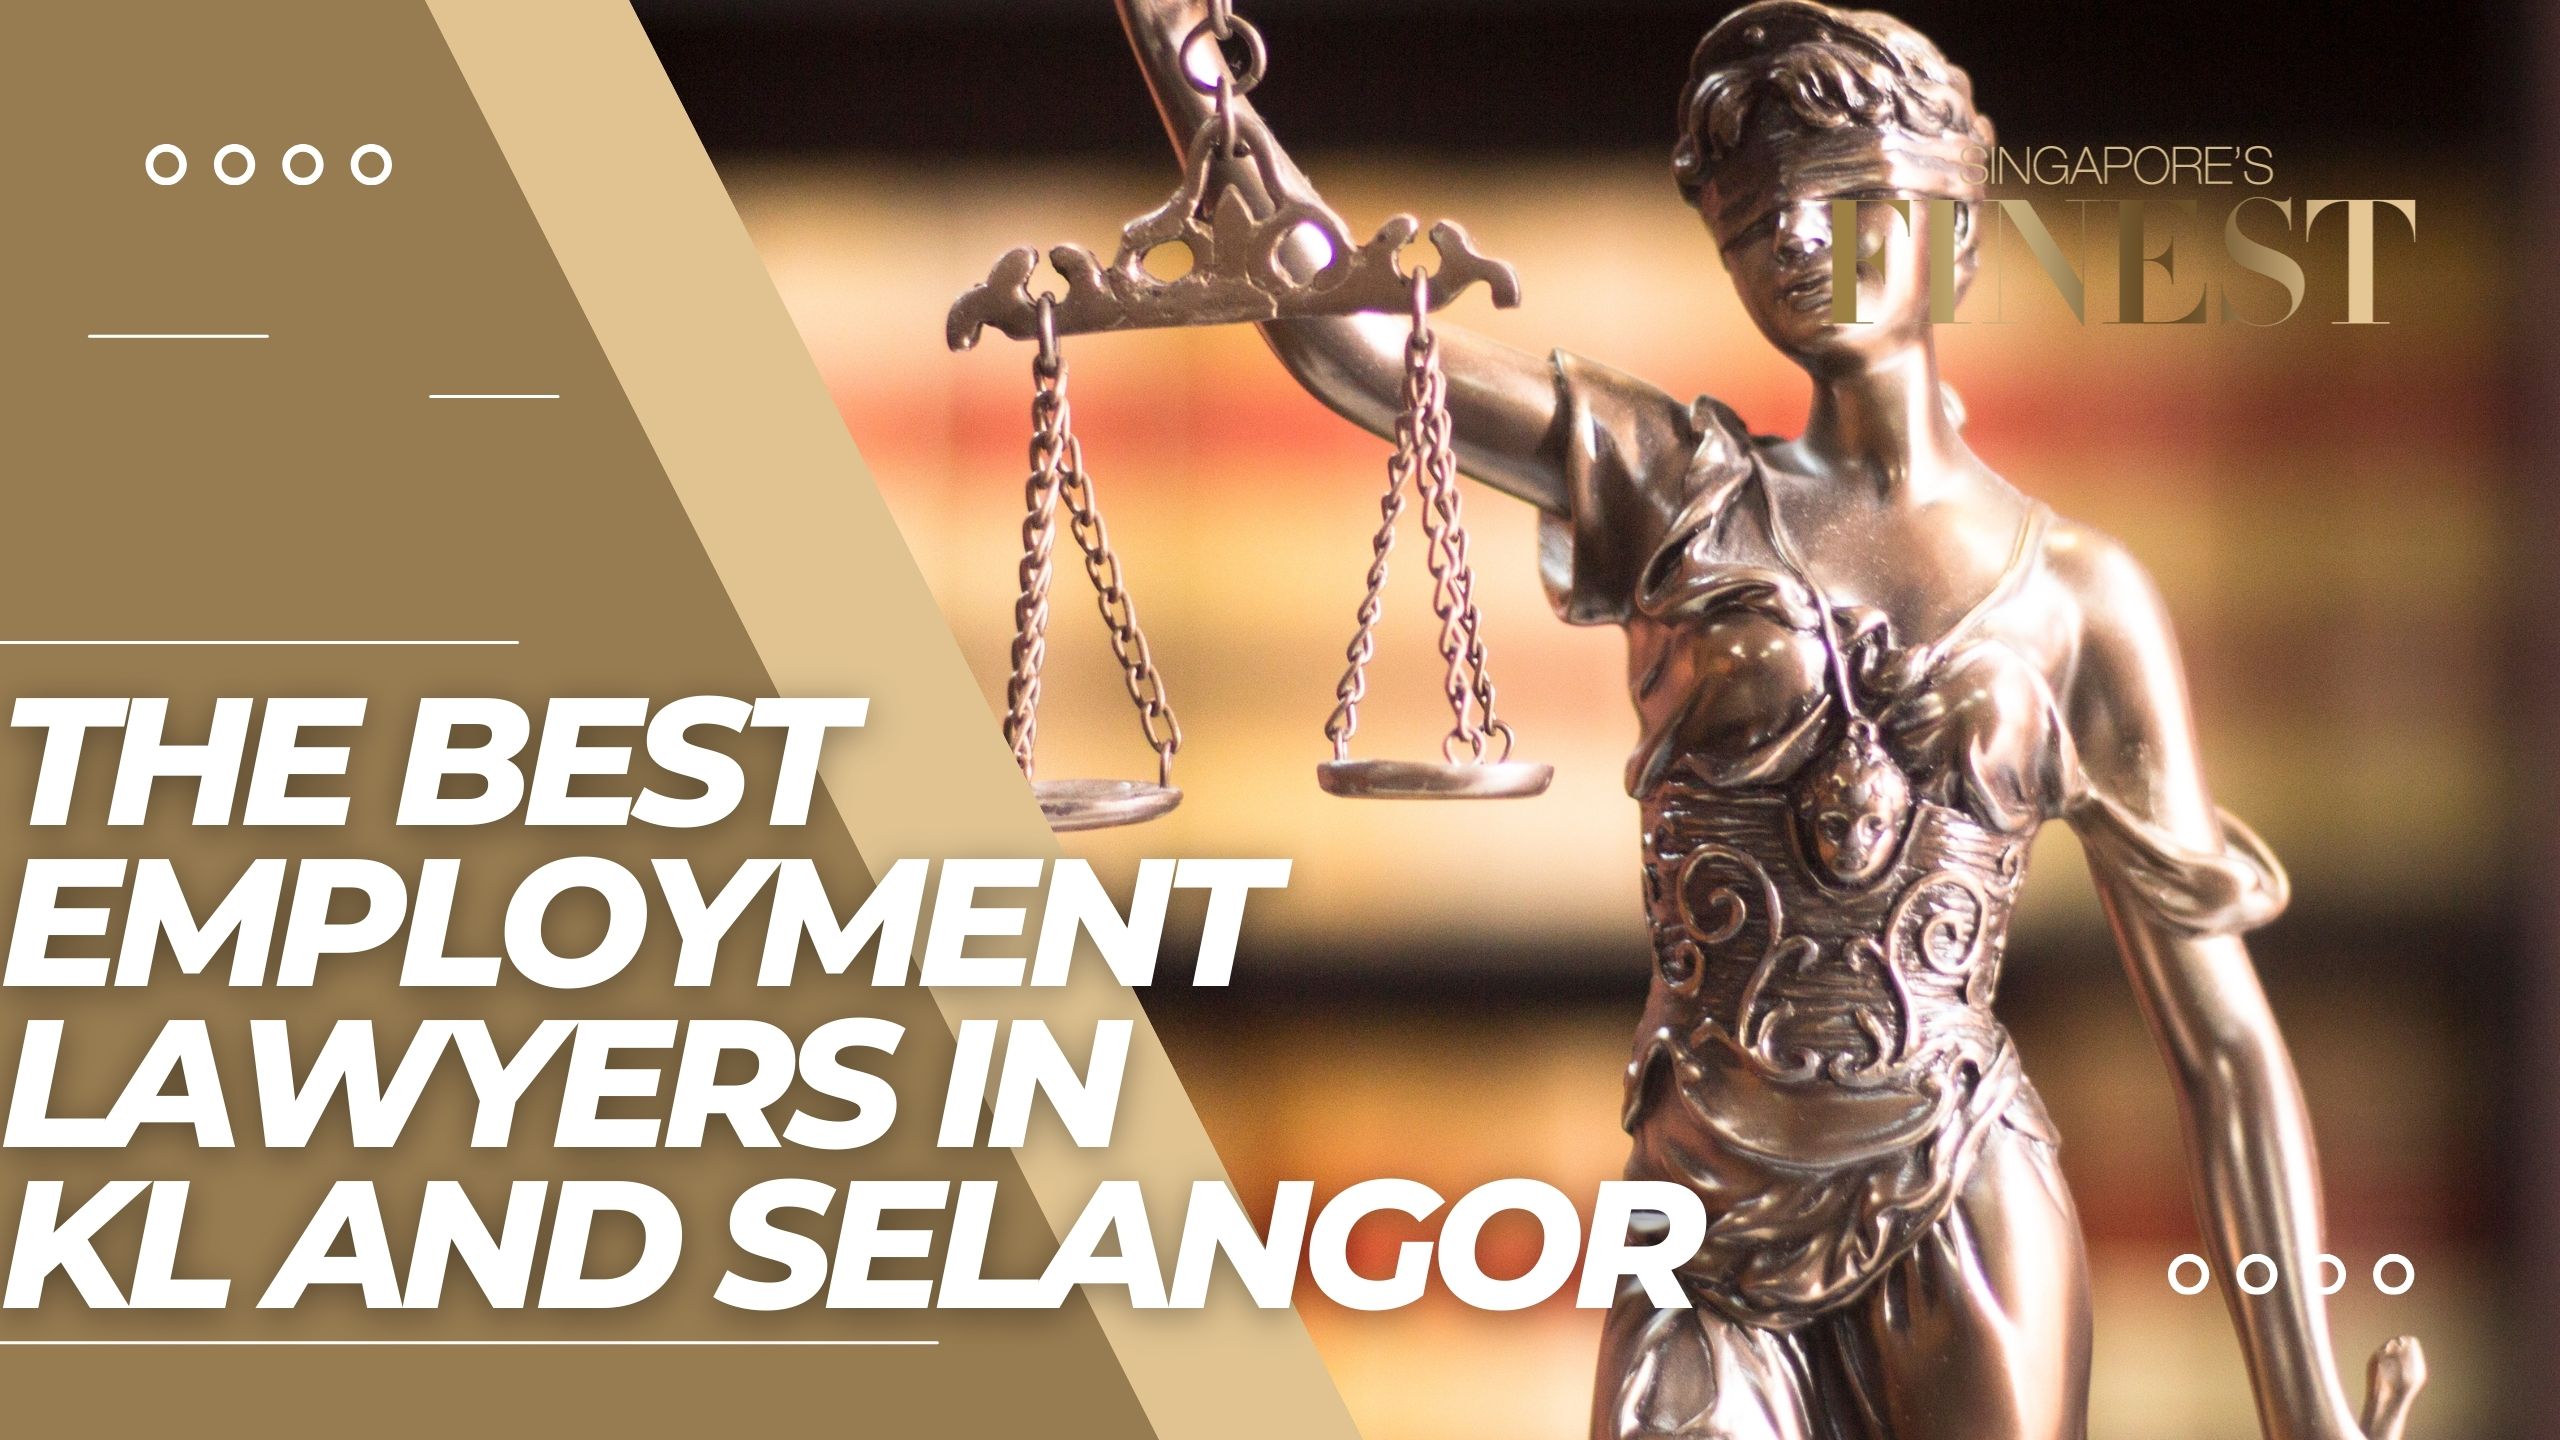 The Finest Employment Lawyers in KL and Selangor